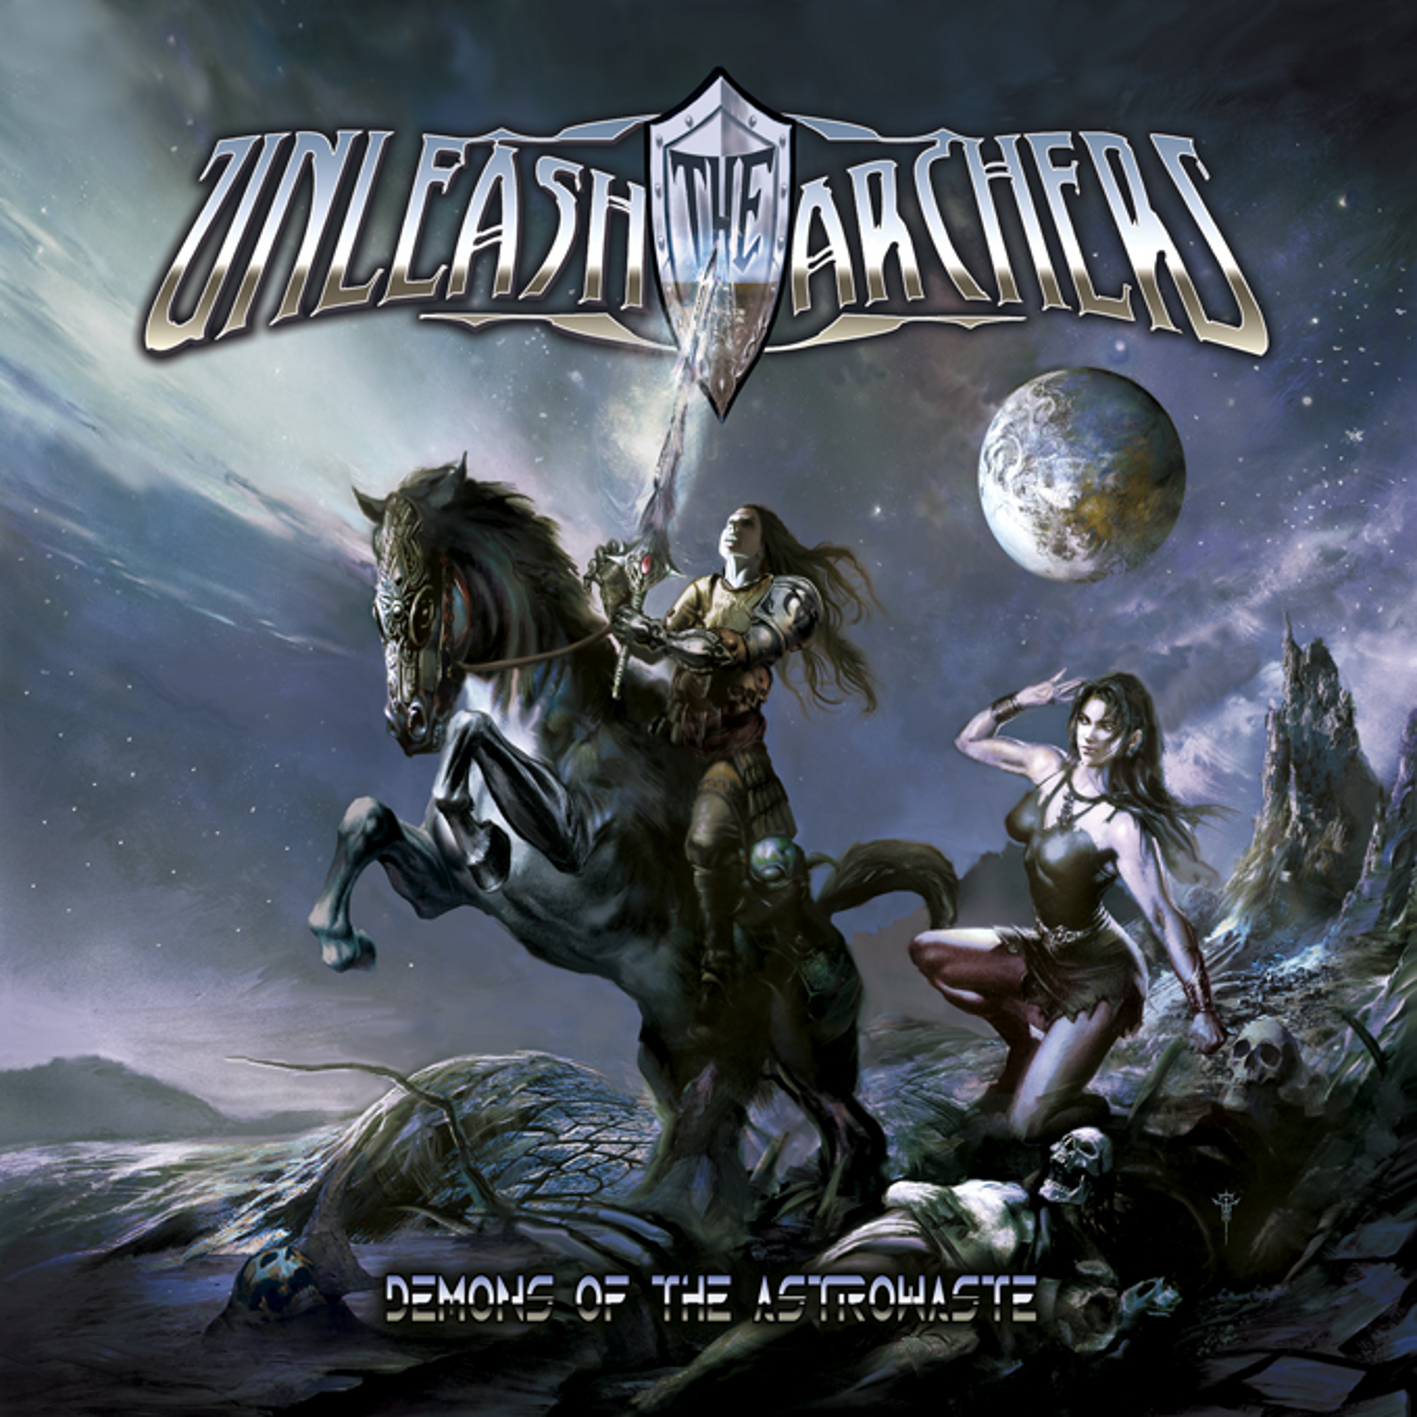 Meaning of Night of the Werewolves by Unleash the Archers